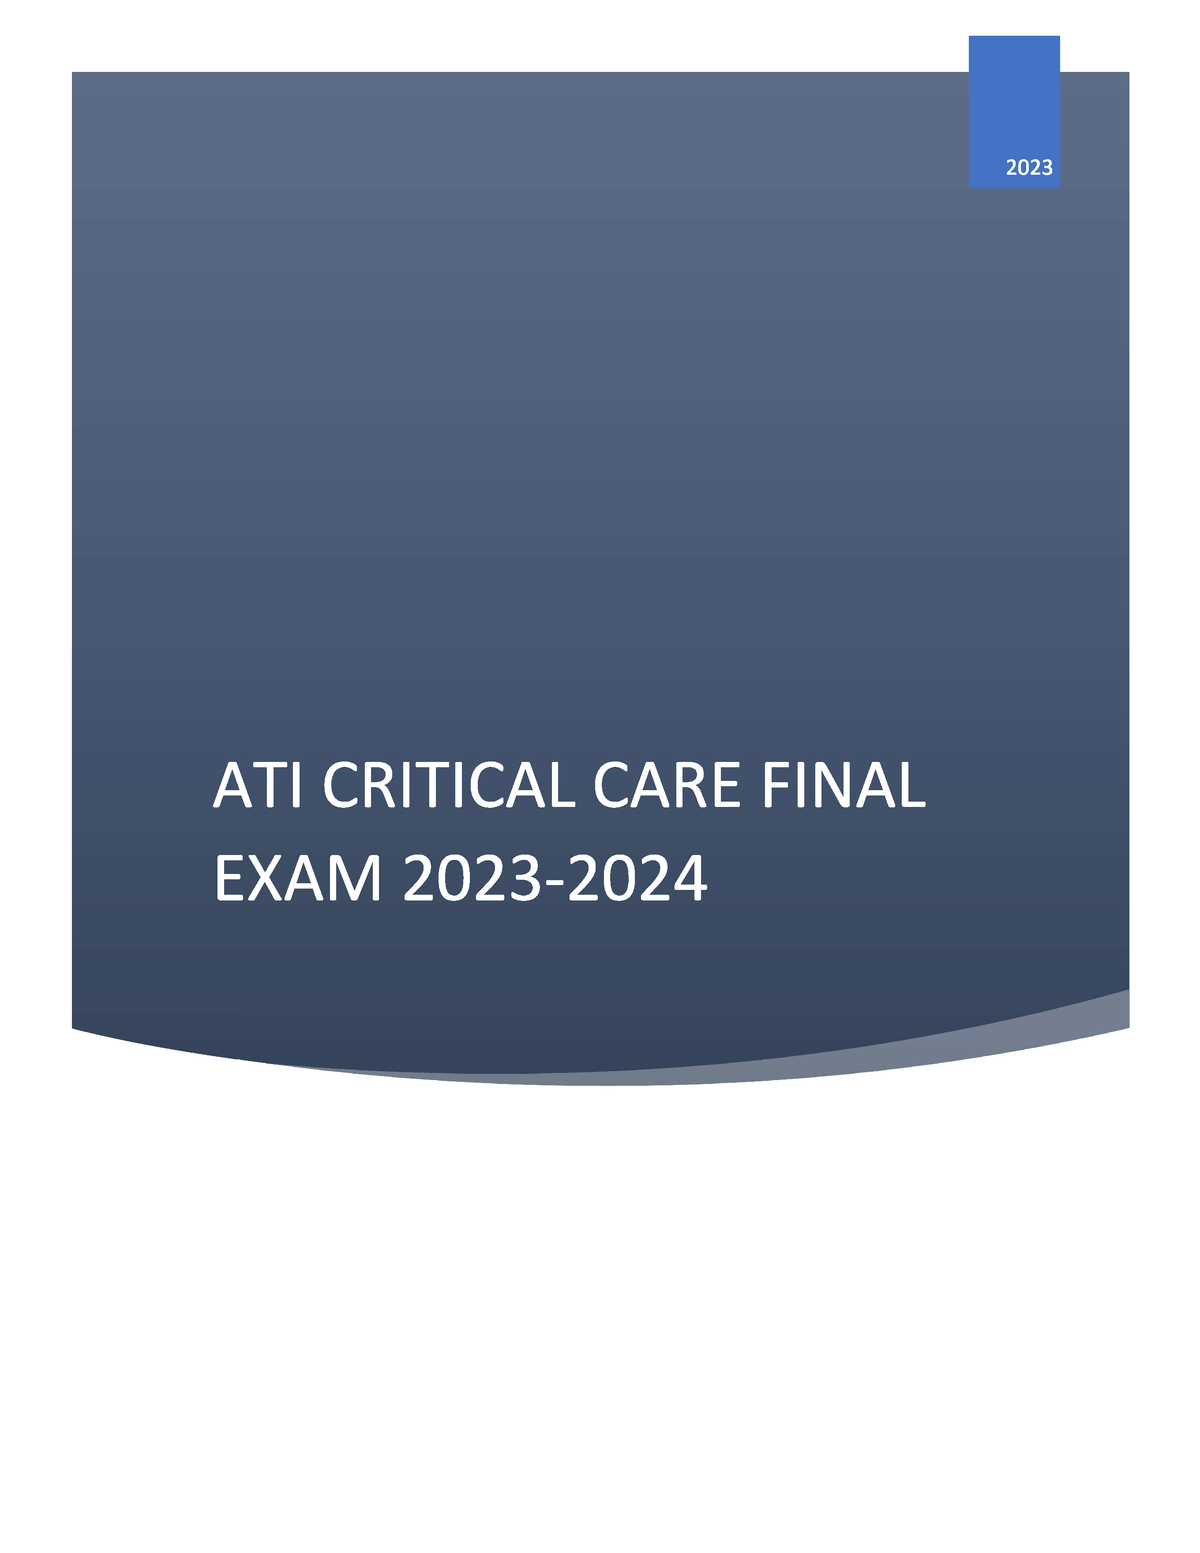 2024 NGN ATI CRITICAL THINKING EXAM: COMPREHENSIVE ASSESSMENT OF